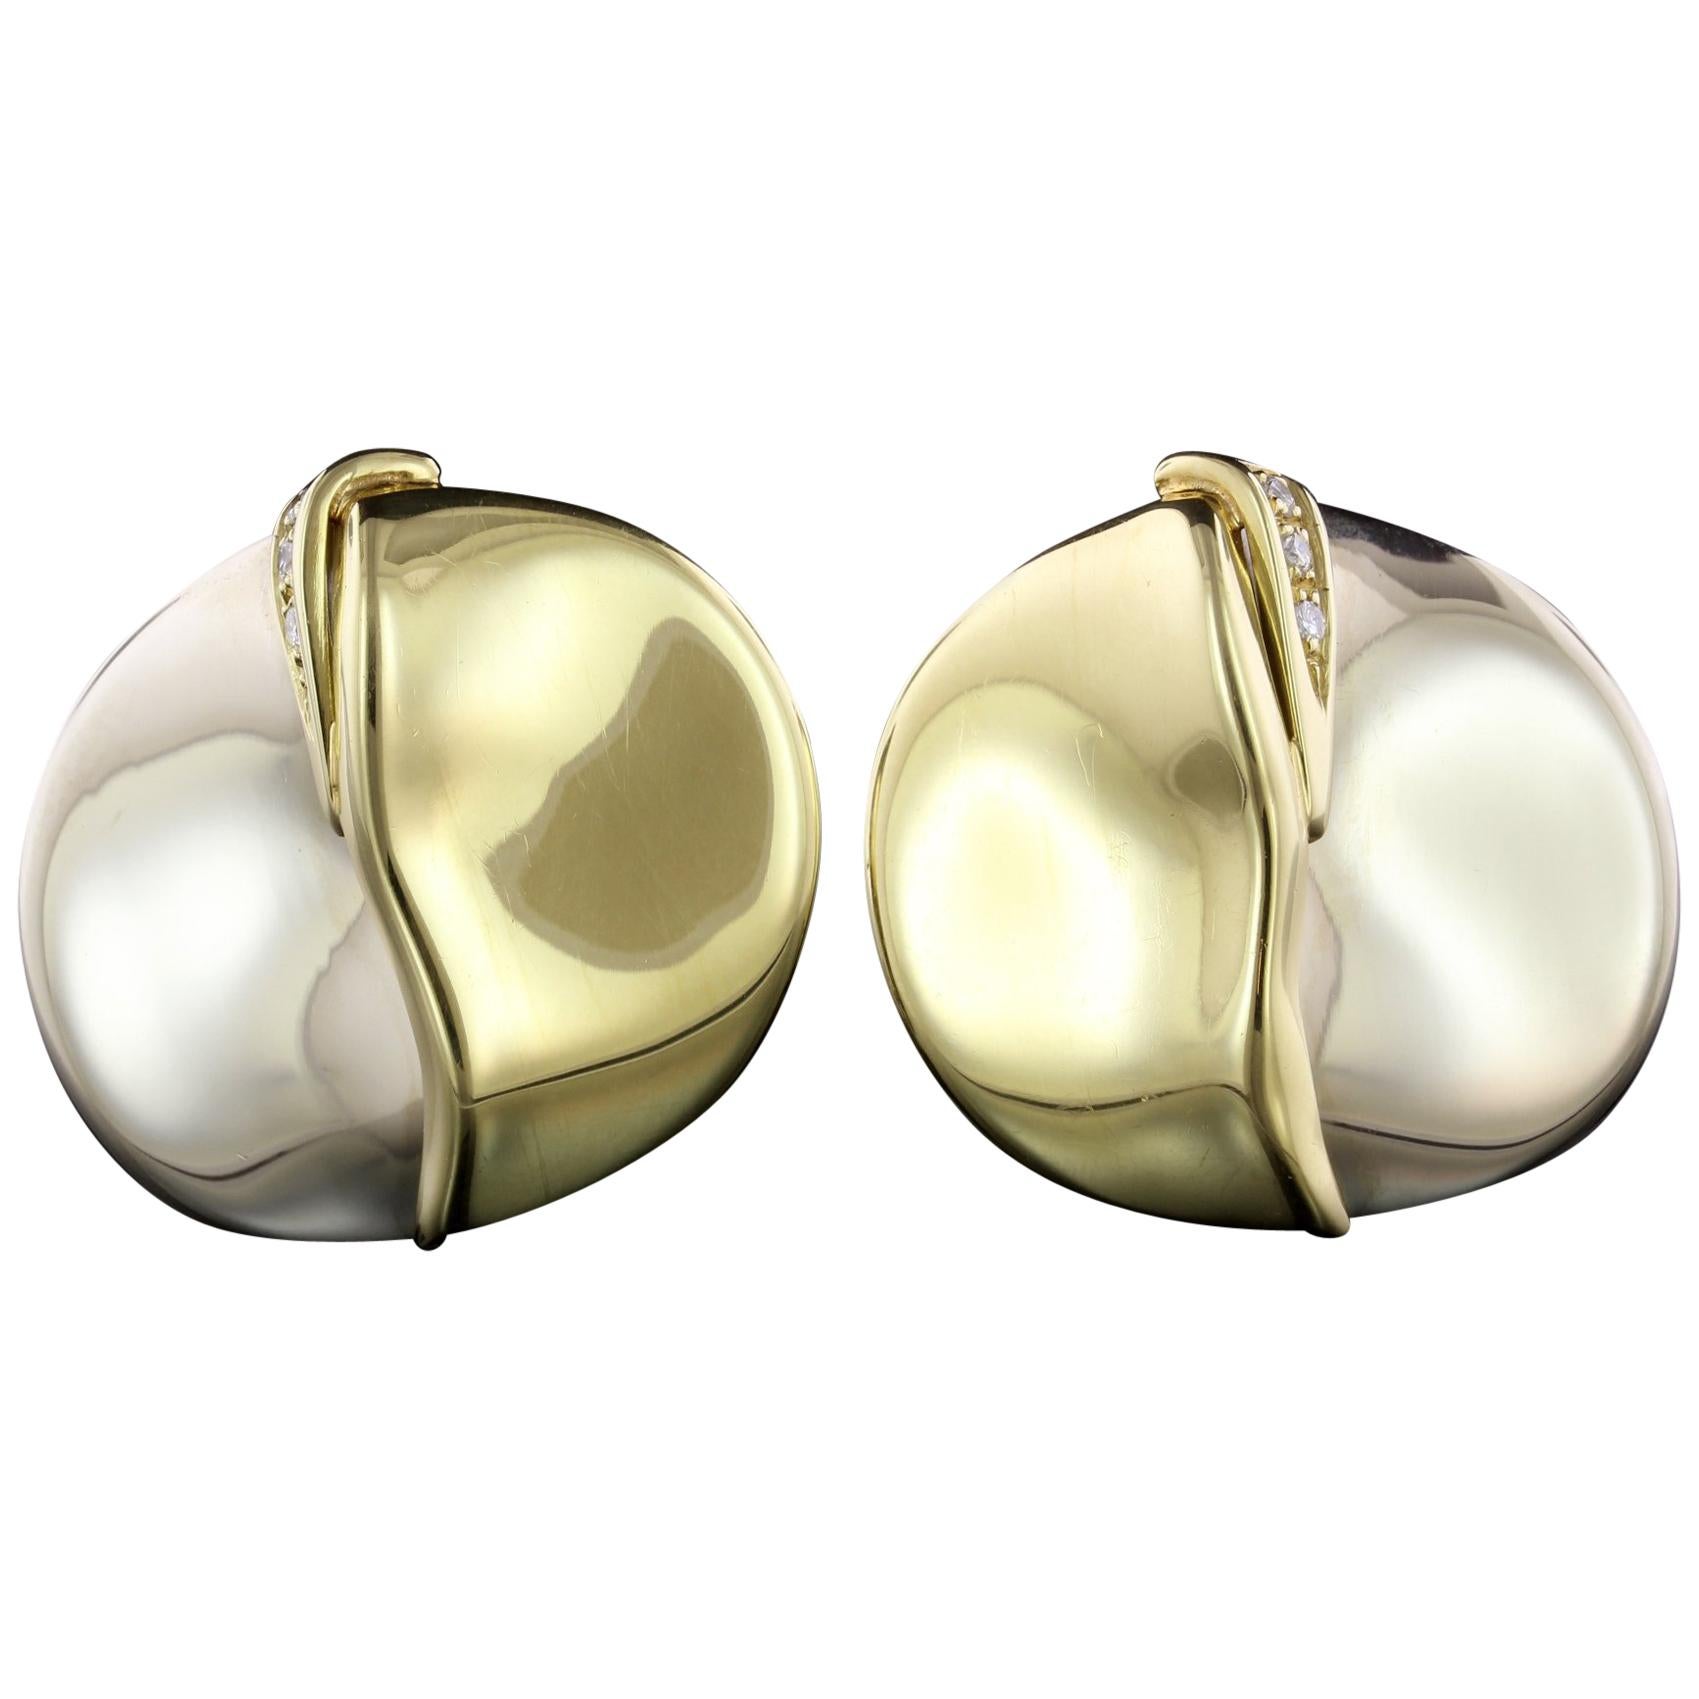 Misani 18 Karat Two-Tone Gold and Diamond Earrings, Italy For Sale